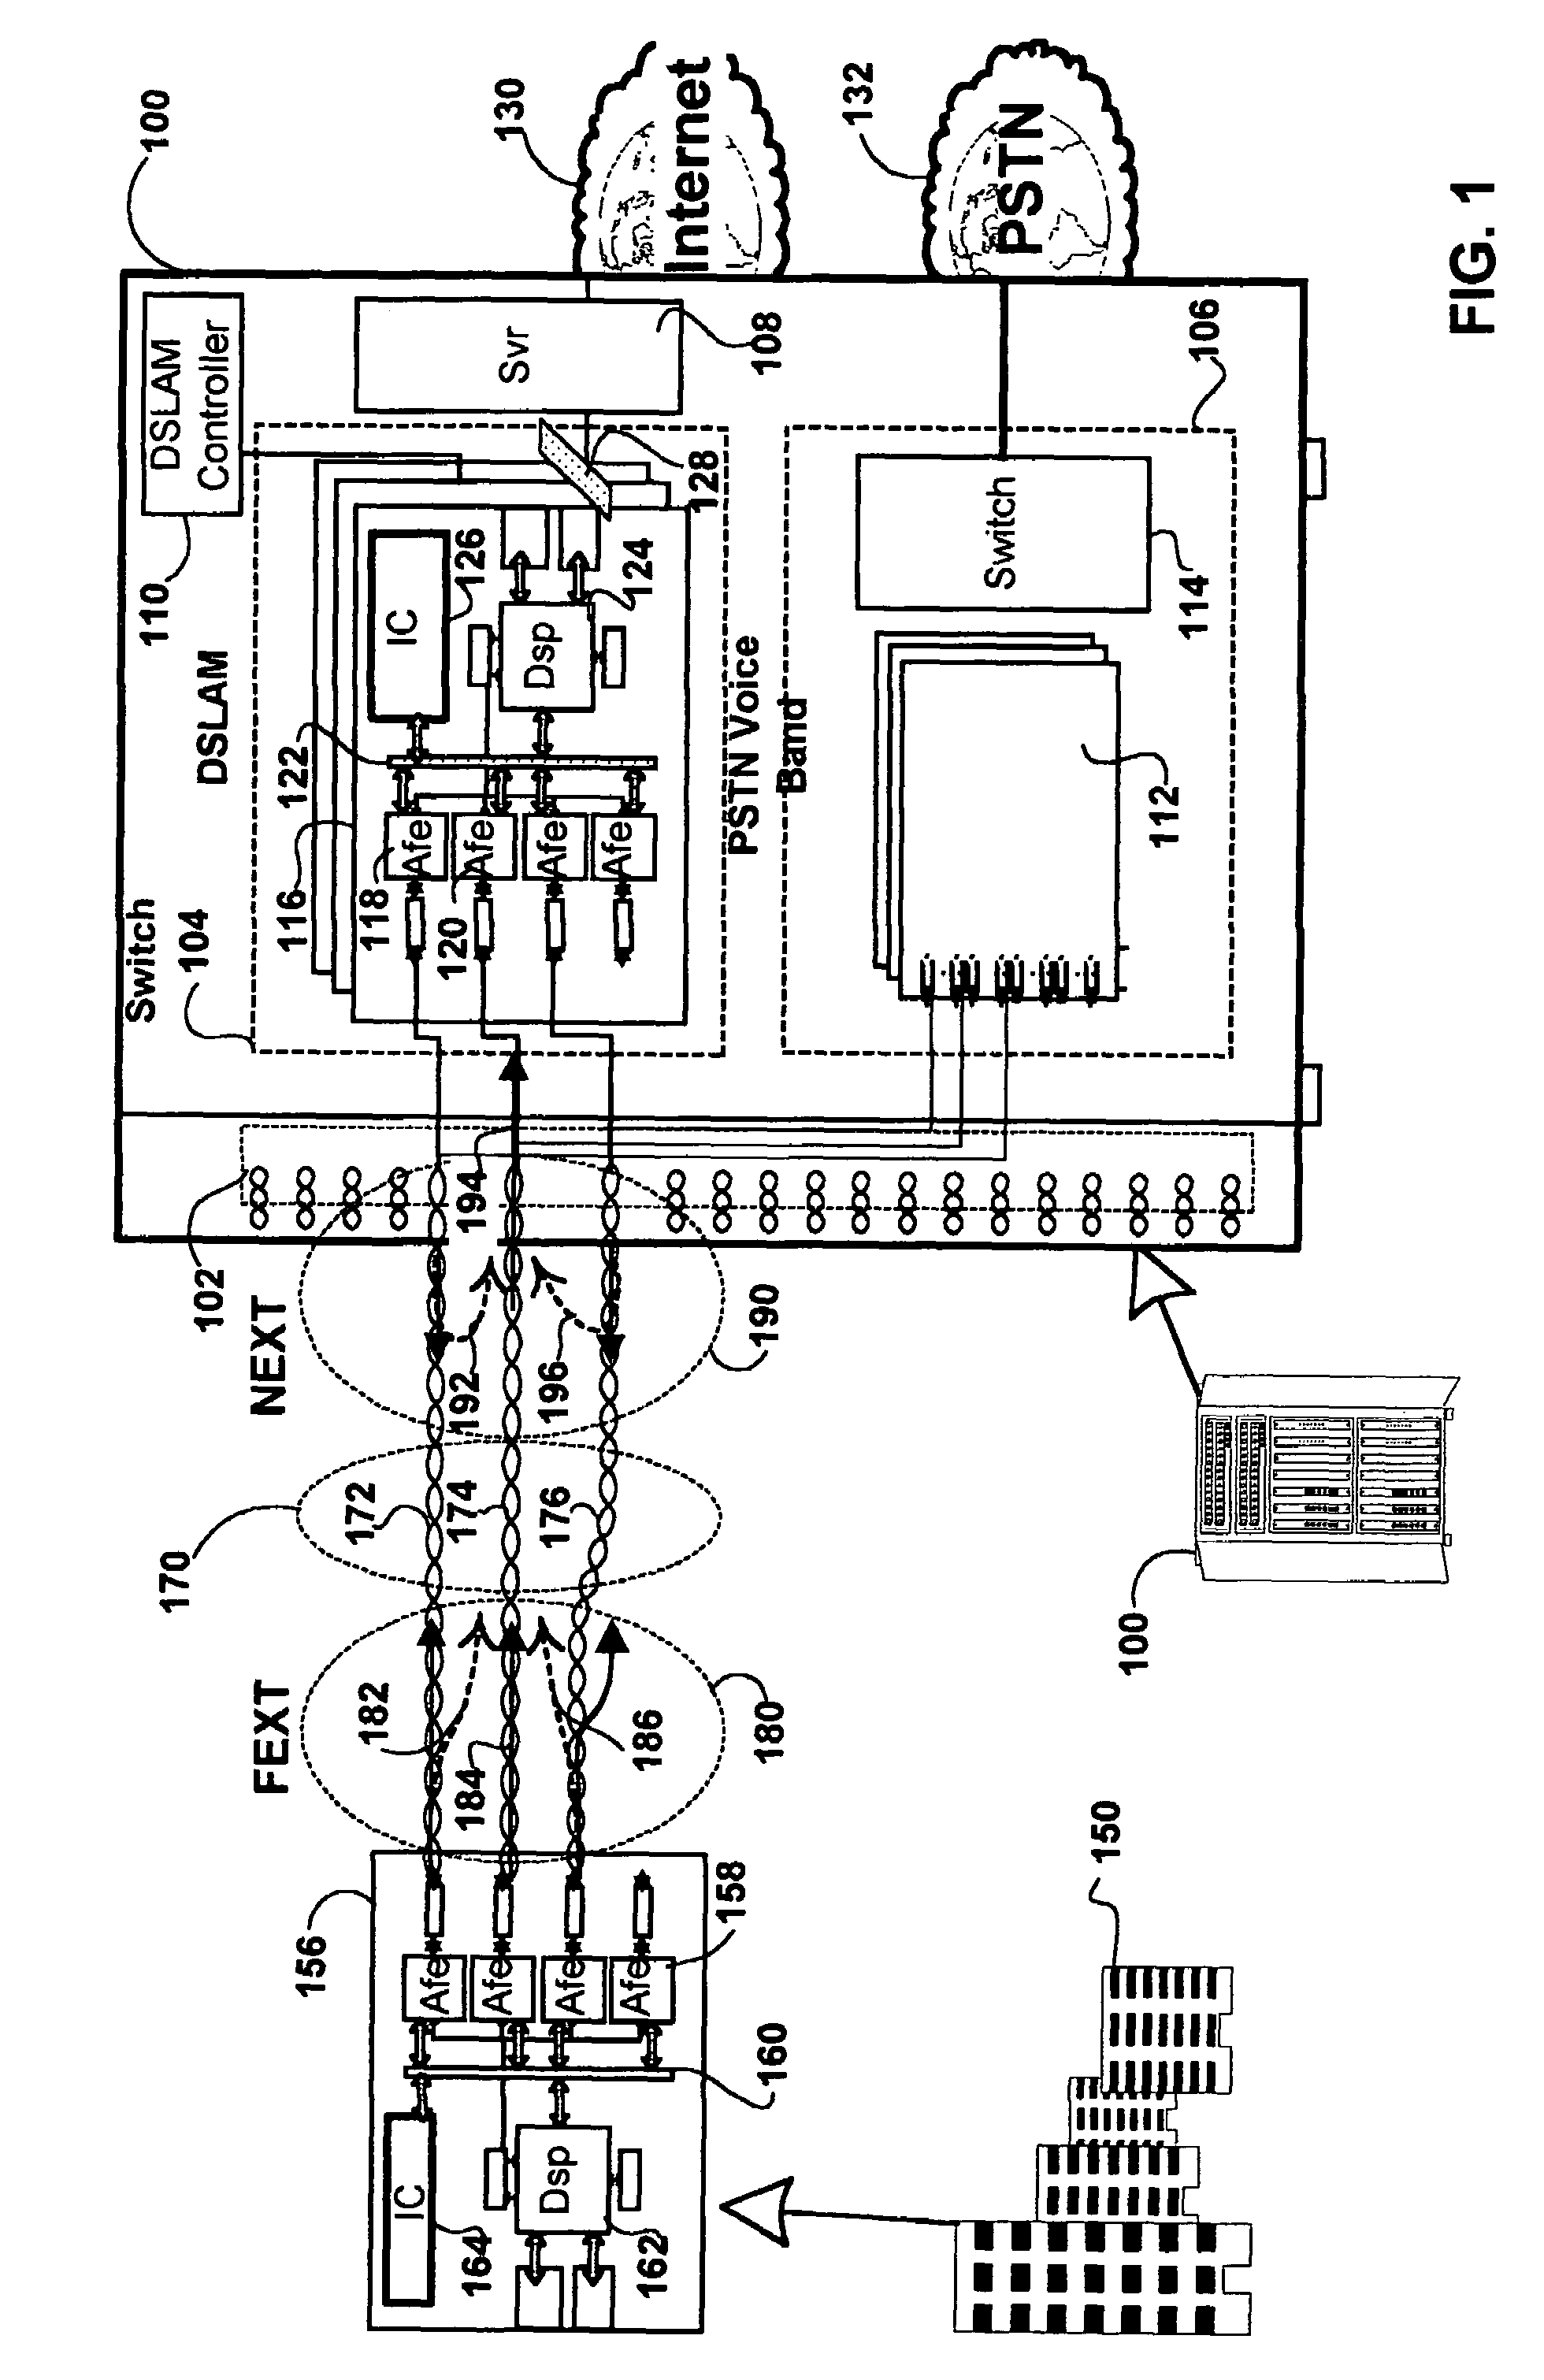 Method and apparatus for interference cancellation in shared communication mediums